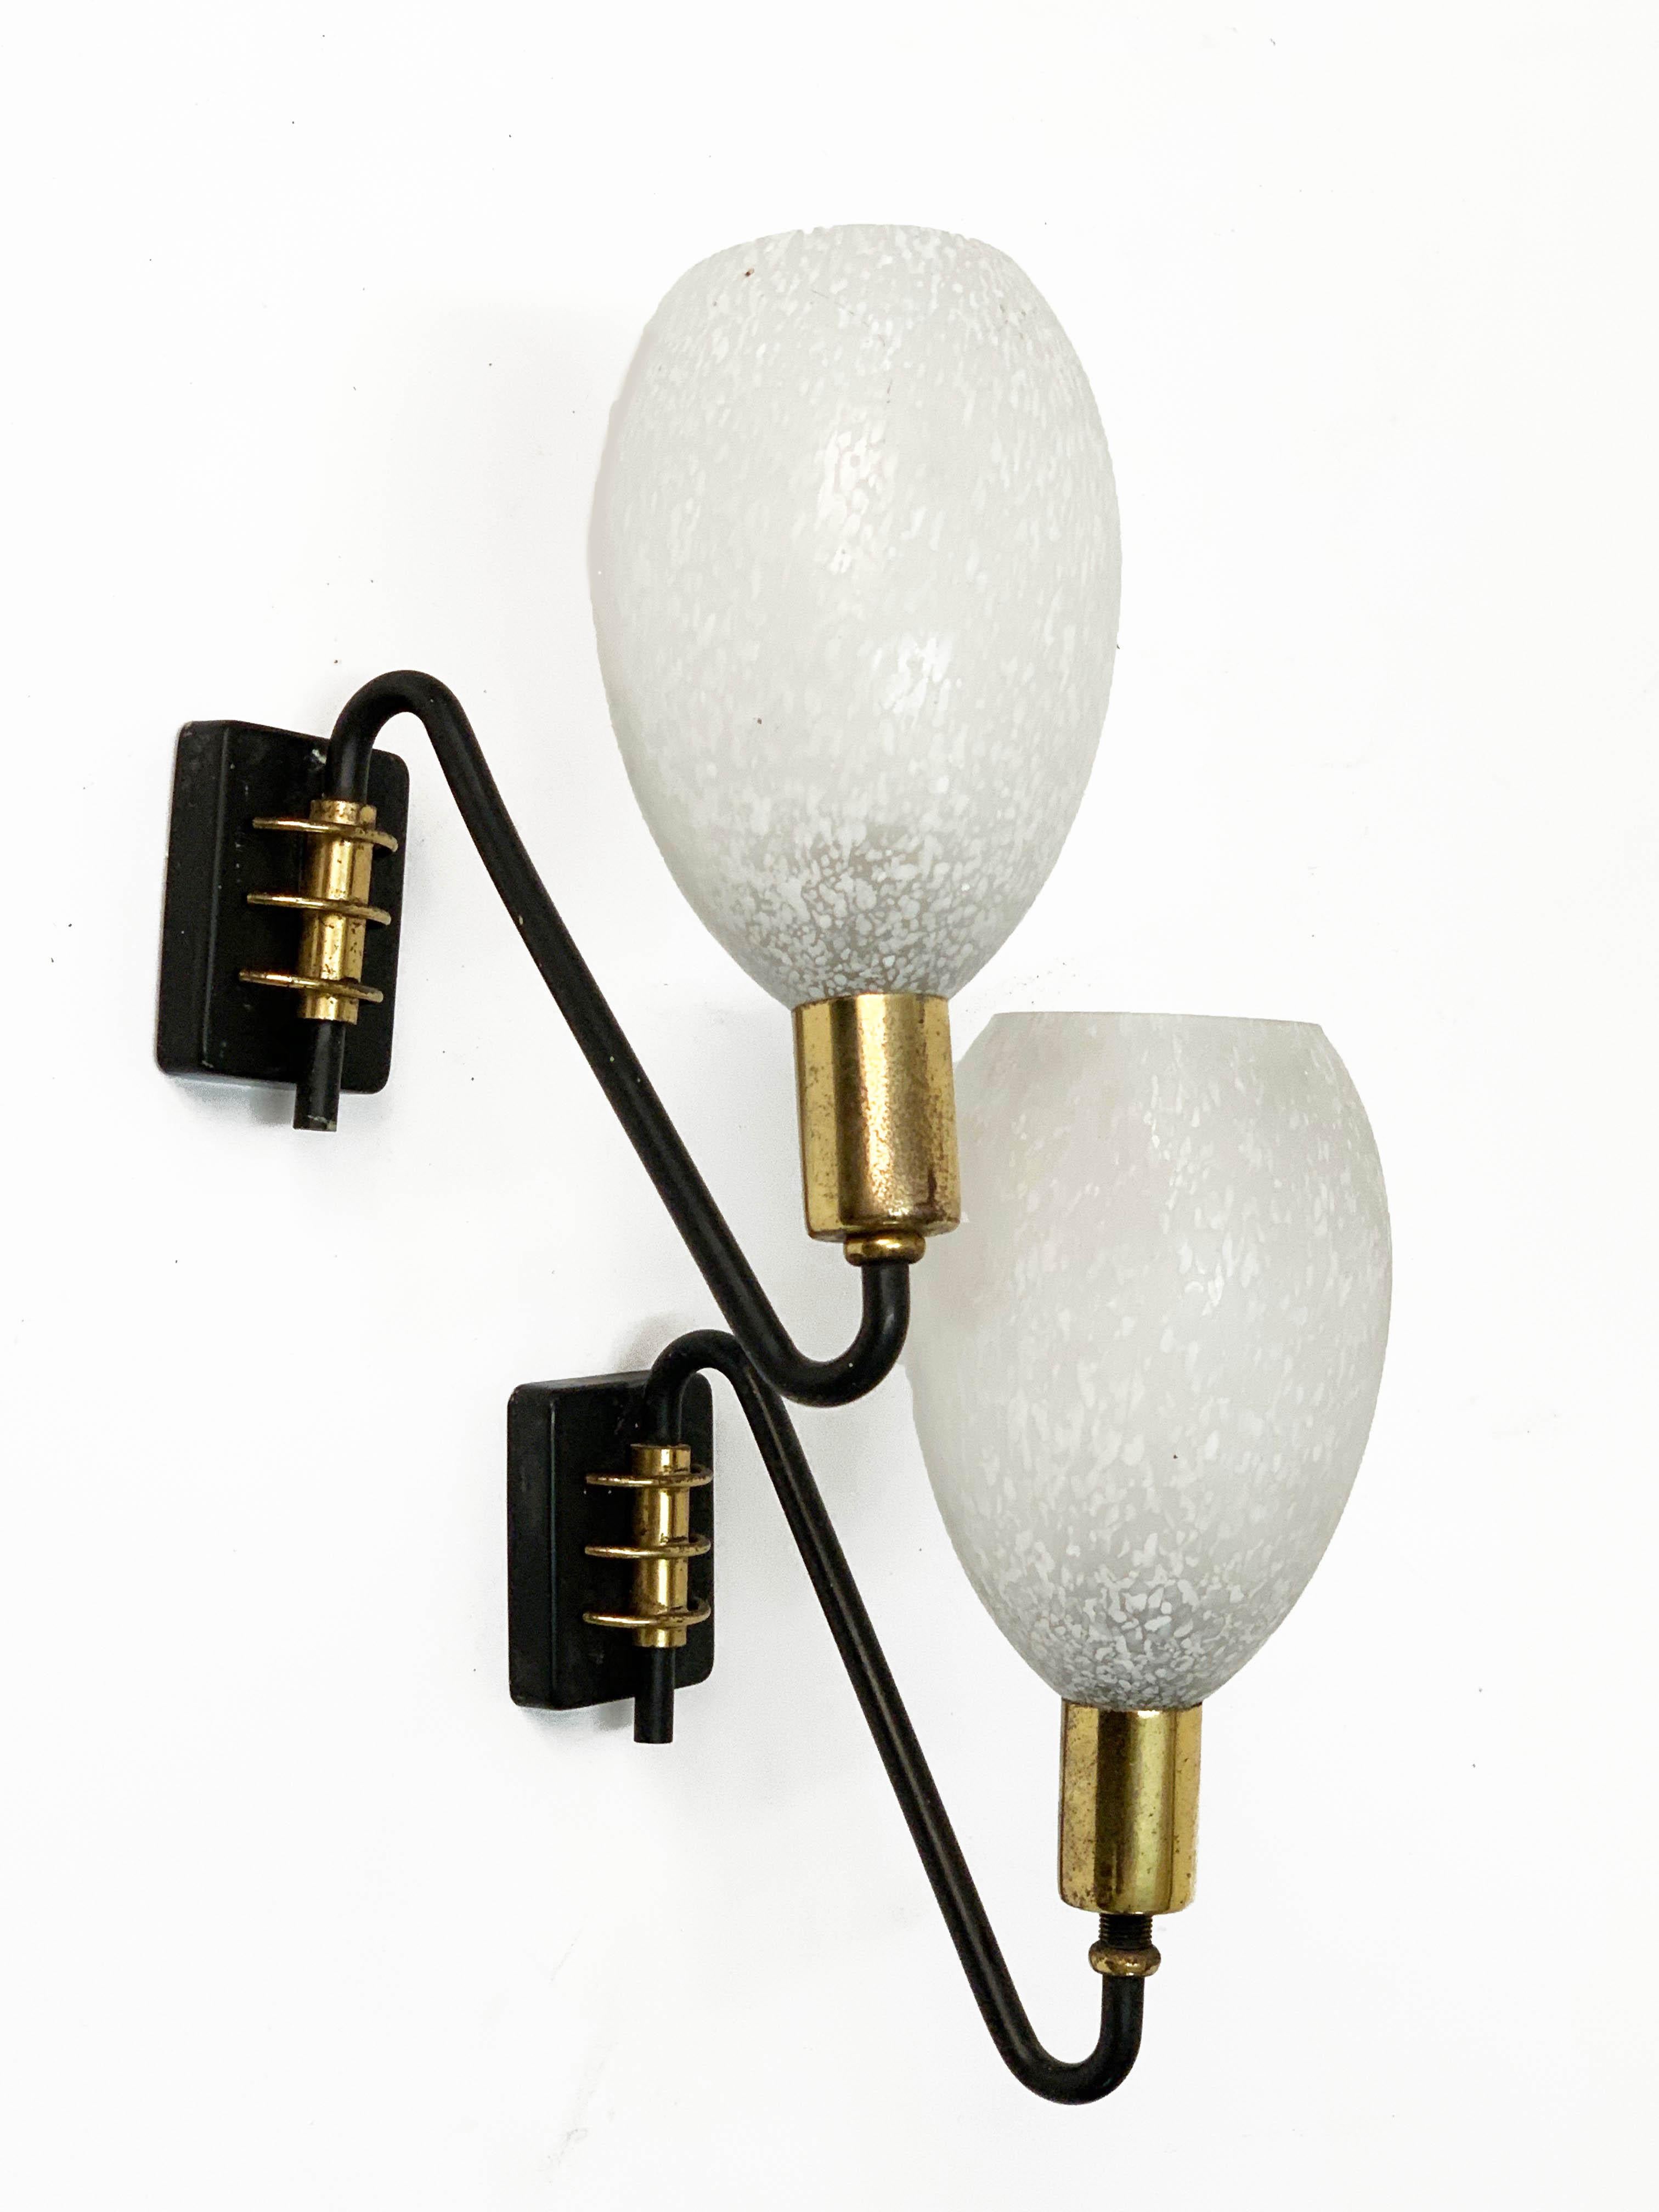 Pair of stunning midcentury sconces in brass and white Murano glass. These items were produced in Italy during the 1960s.

These items are a perfect mix of a spotted milky white Murano glass lampshade with a black enamelled metal and brass